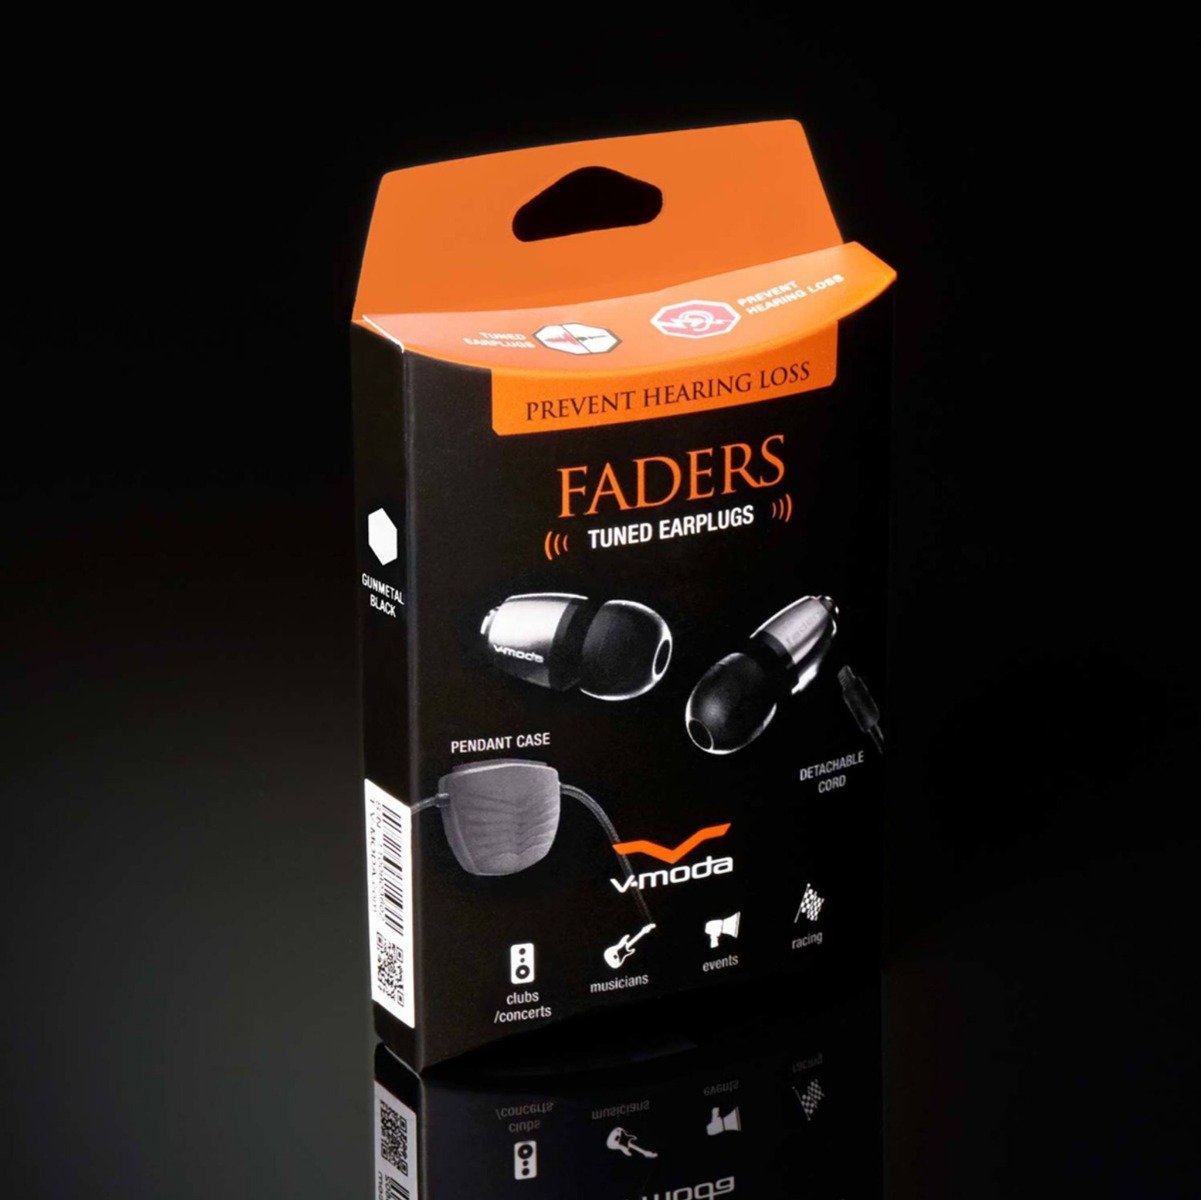 What the critics are saying about the V-MODA Faders VIP